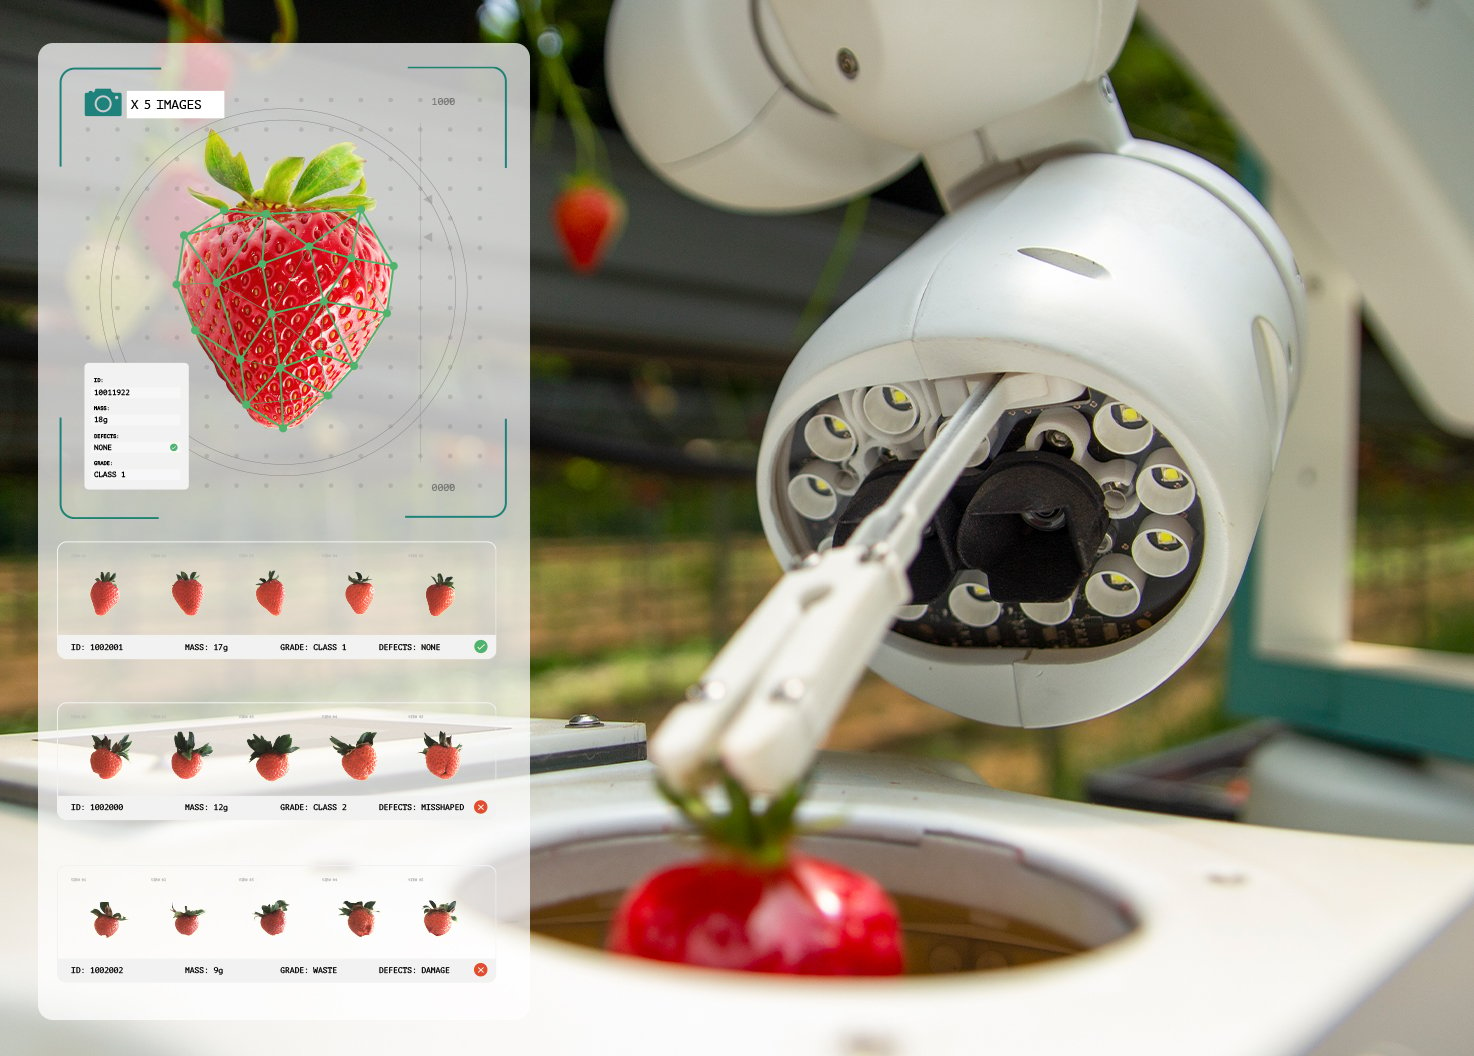 Dogtooth’s strawberry-picking robot uses an inspection system to sift out defective strawberries, retaining the supermarket-grade fruit for punnet loading